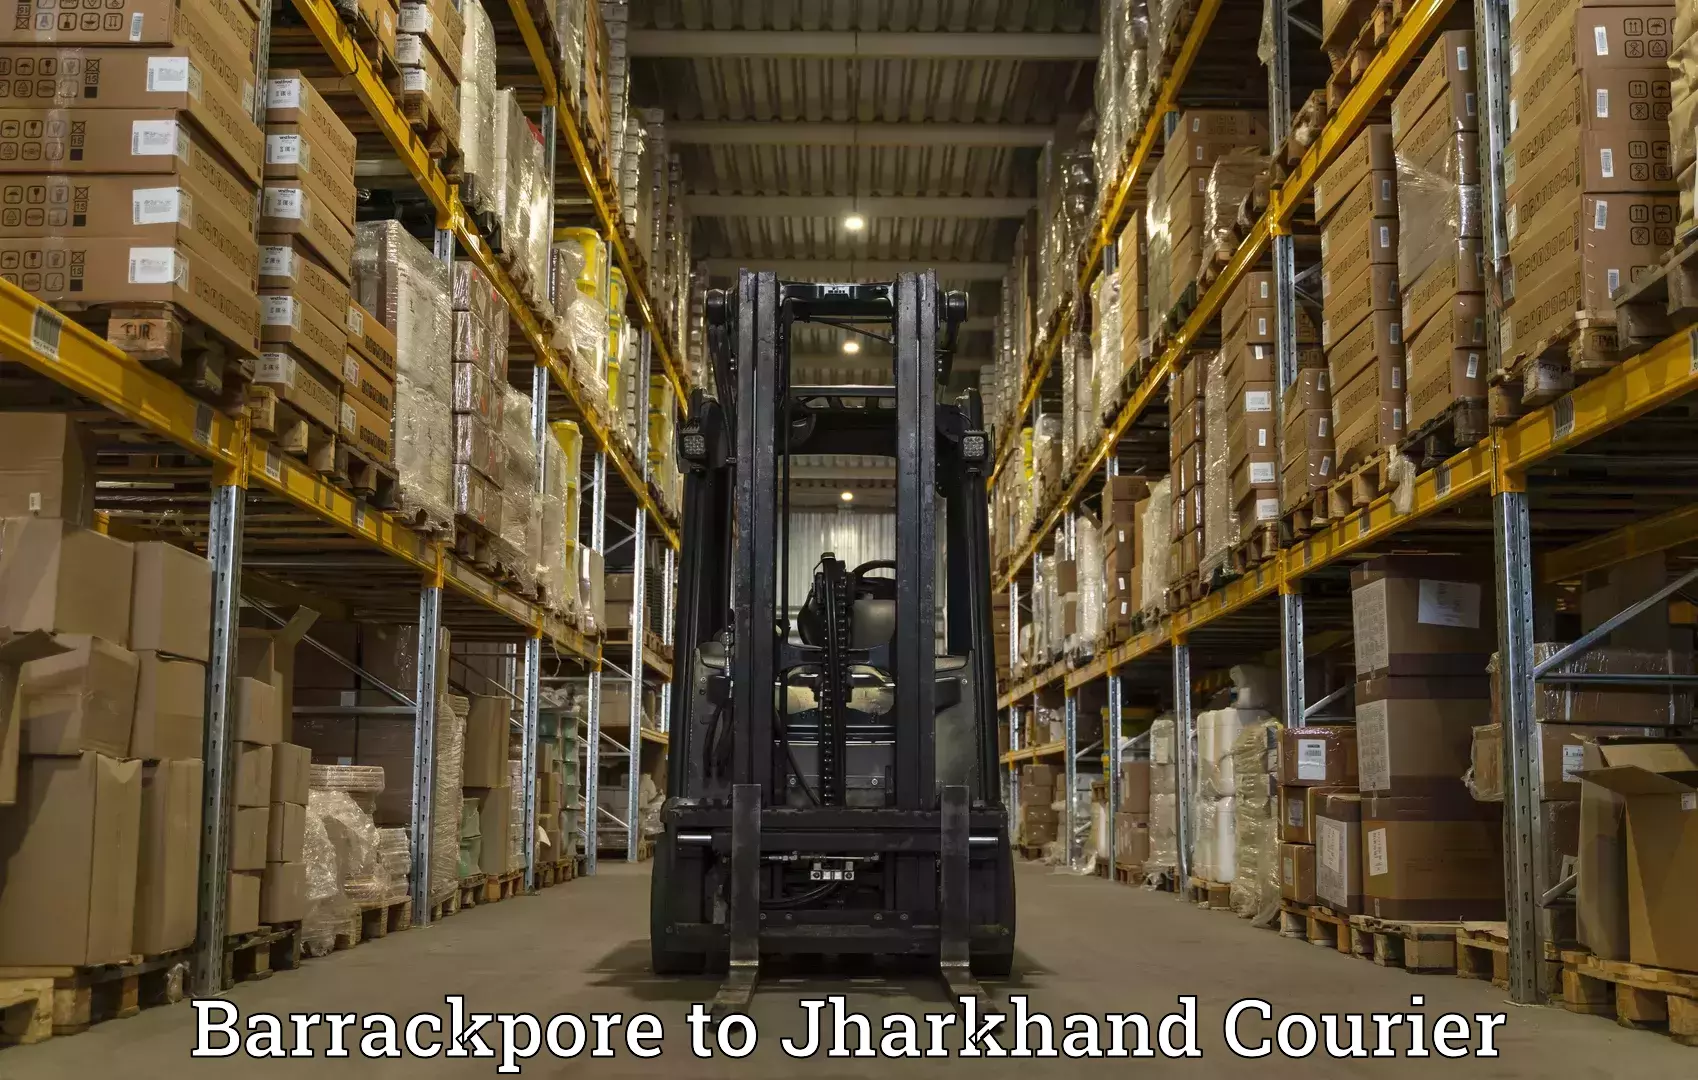 Courier insurance Barrackpore to Jharkhand